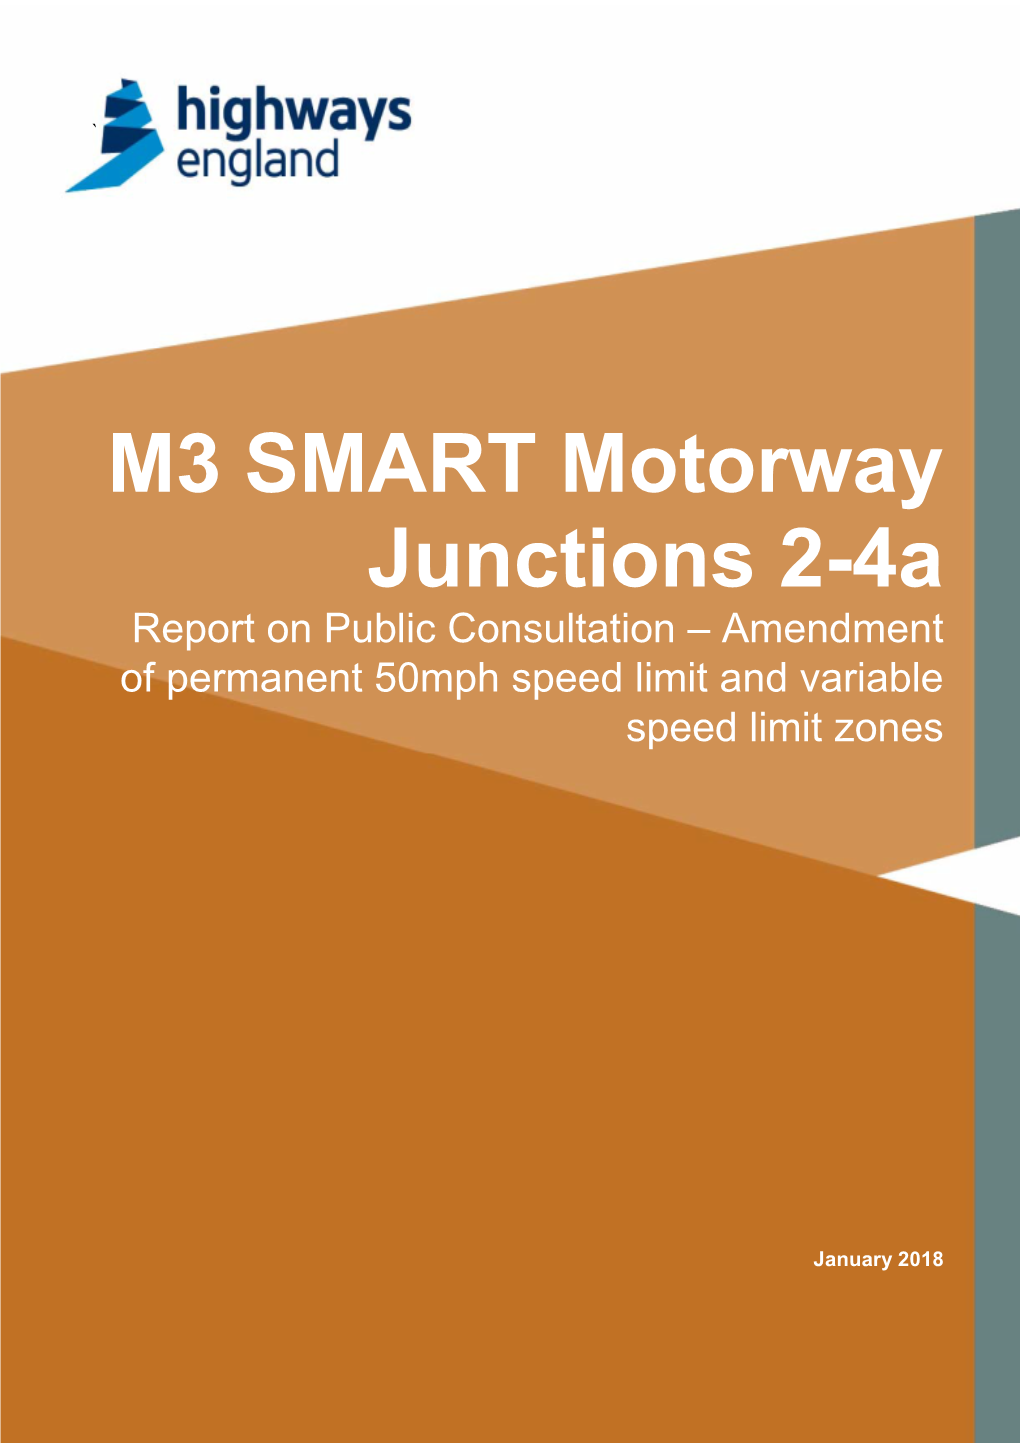 M3 SMART Motorway Junctions 2-4A Report on Public Consultation – Amendment of Permanent 50Mph Speed Limit and Variable Speed Limit Zones